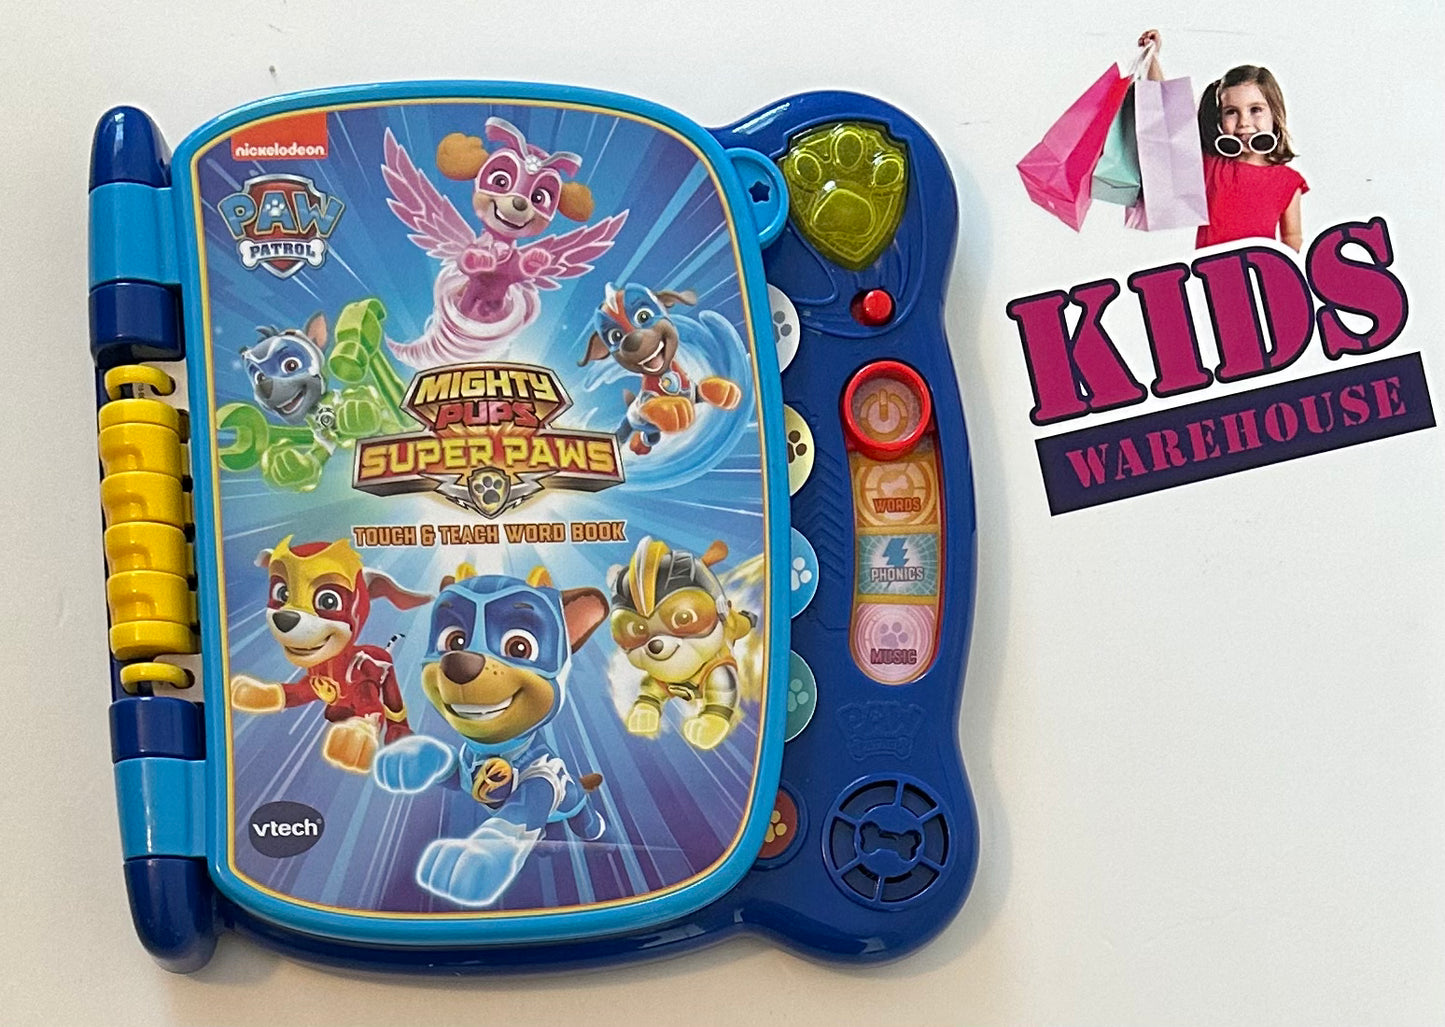 Vtech Nickelodeon Paw Patrol Might Pups Super Paws Touch & Teach Word Book (tested)